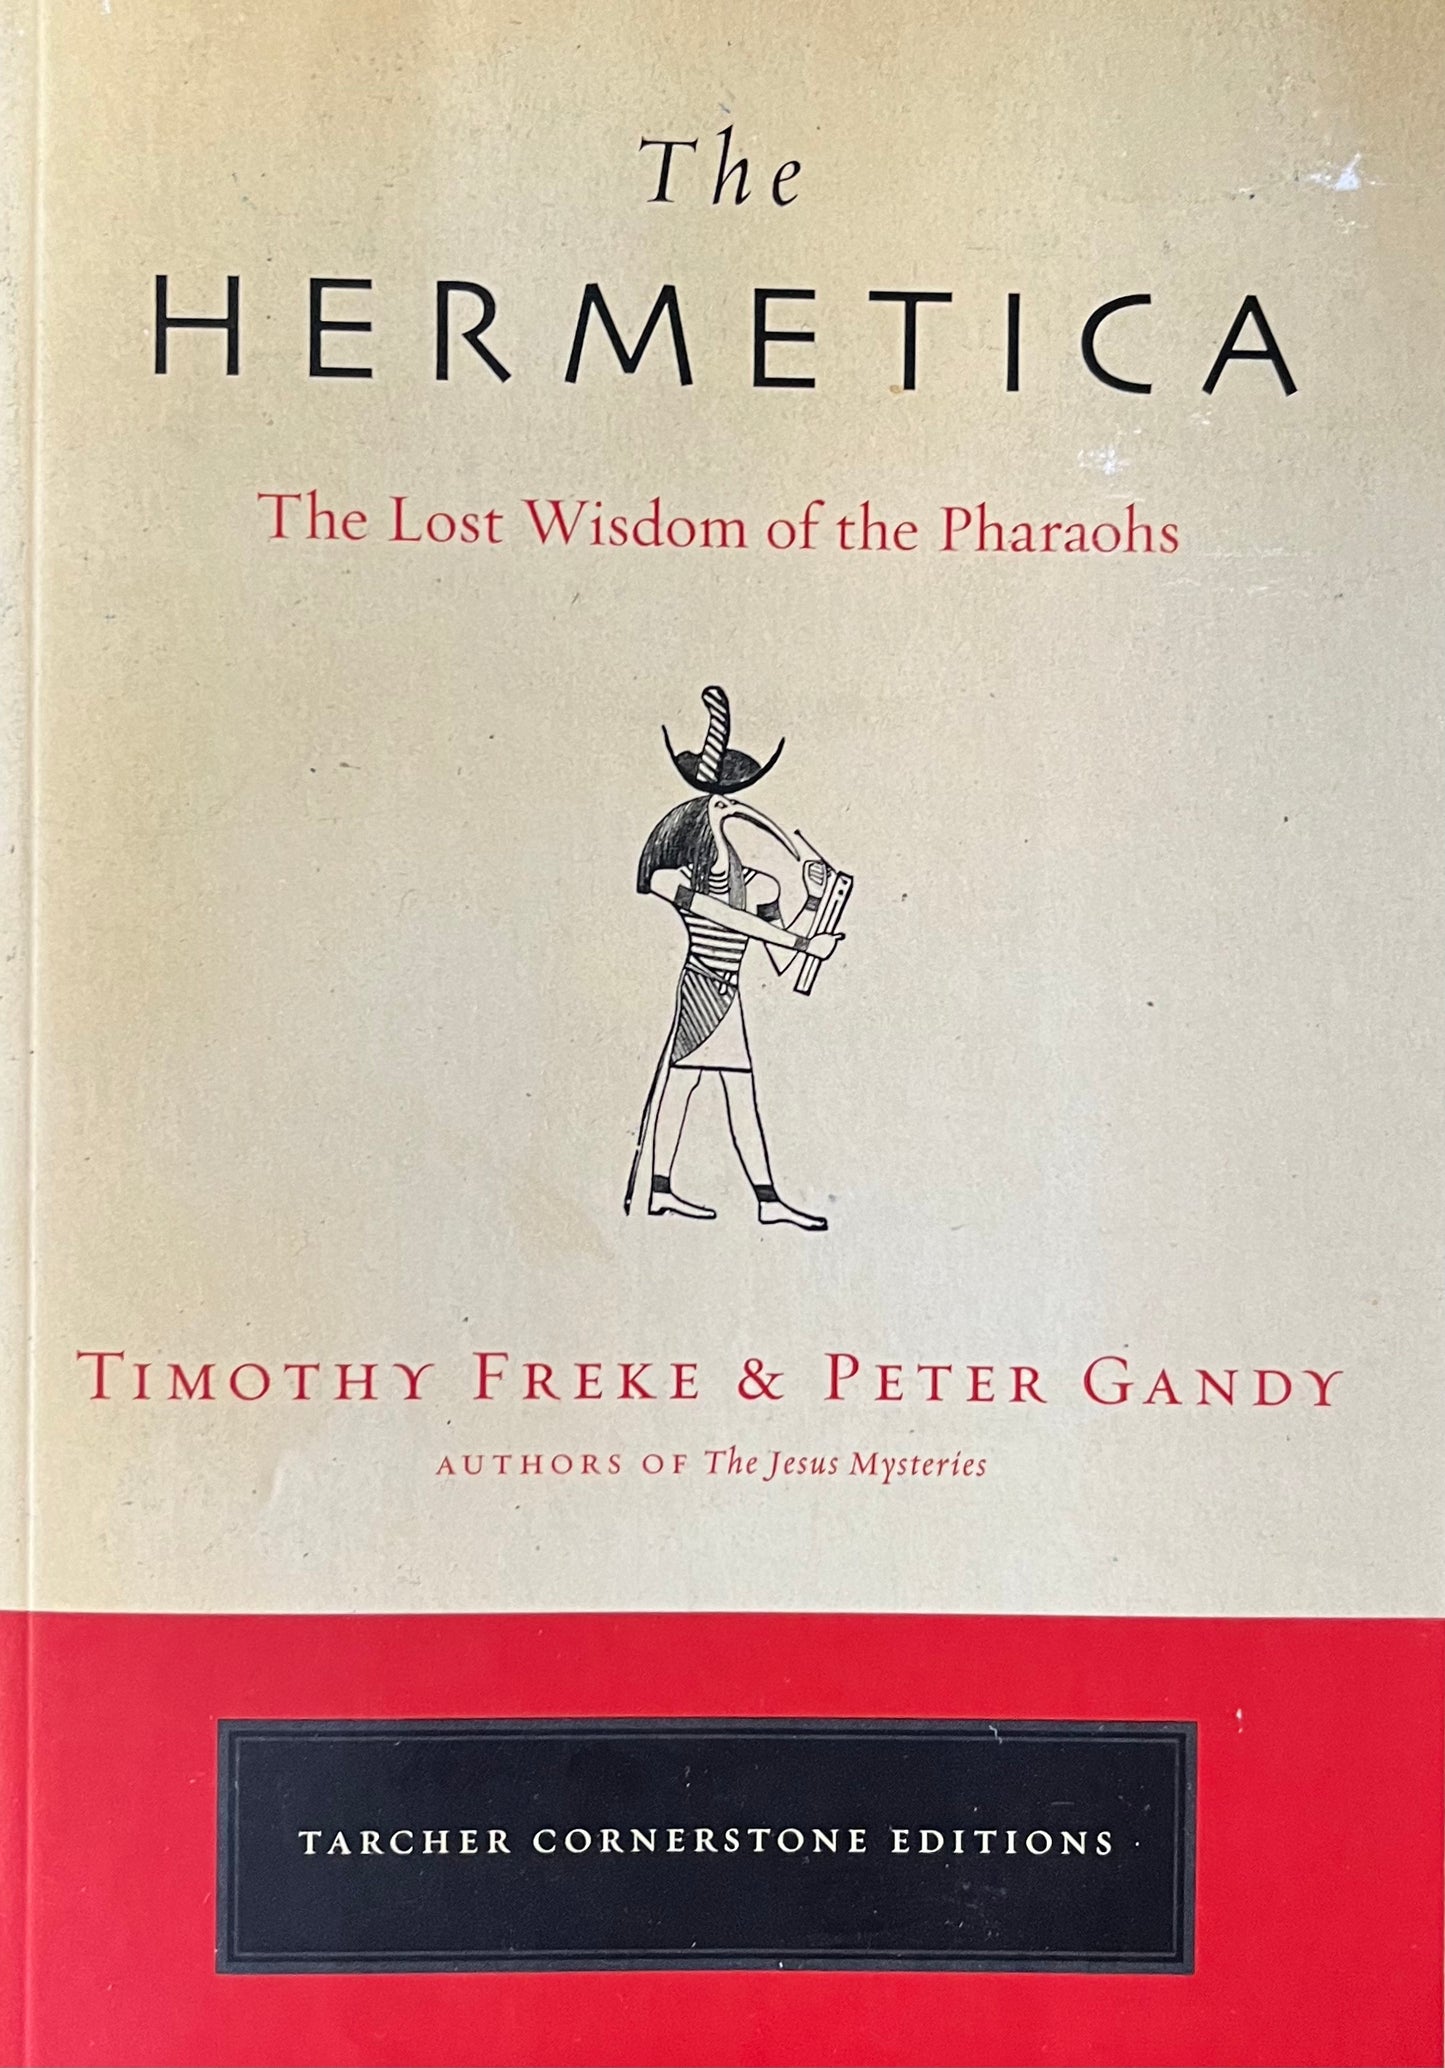 THE HERMETICA - The Lost Wisdom of The Pharaohs by Timothy Freke